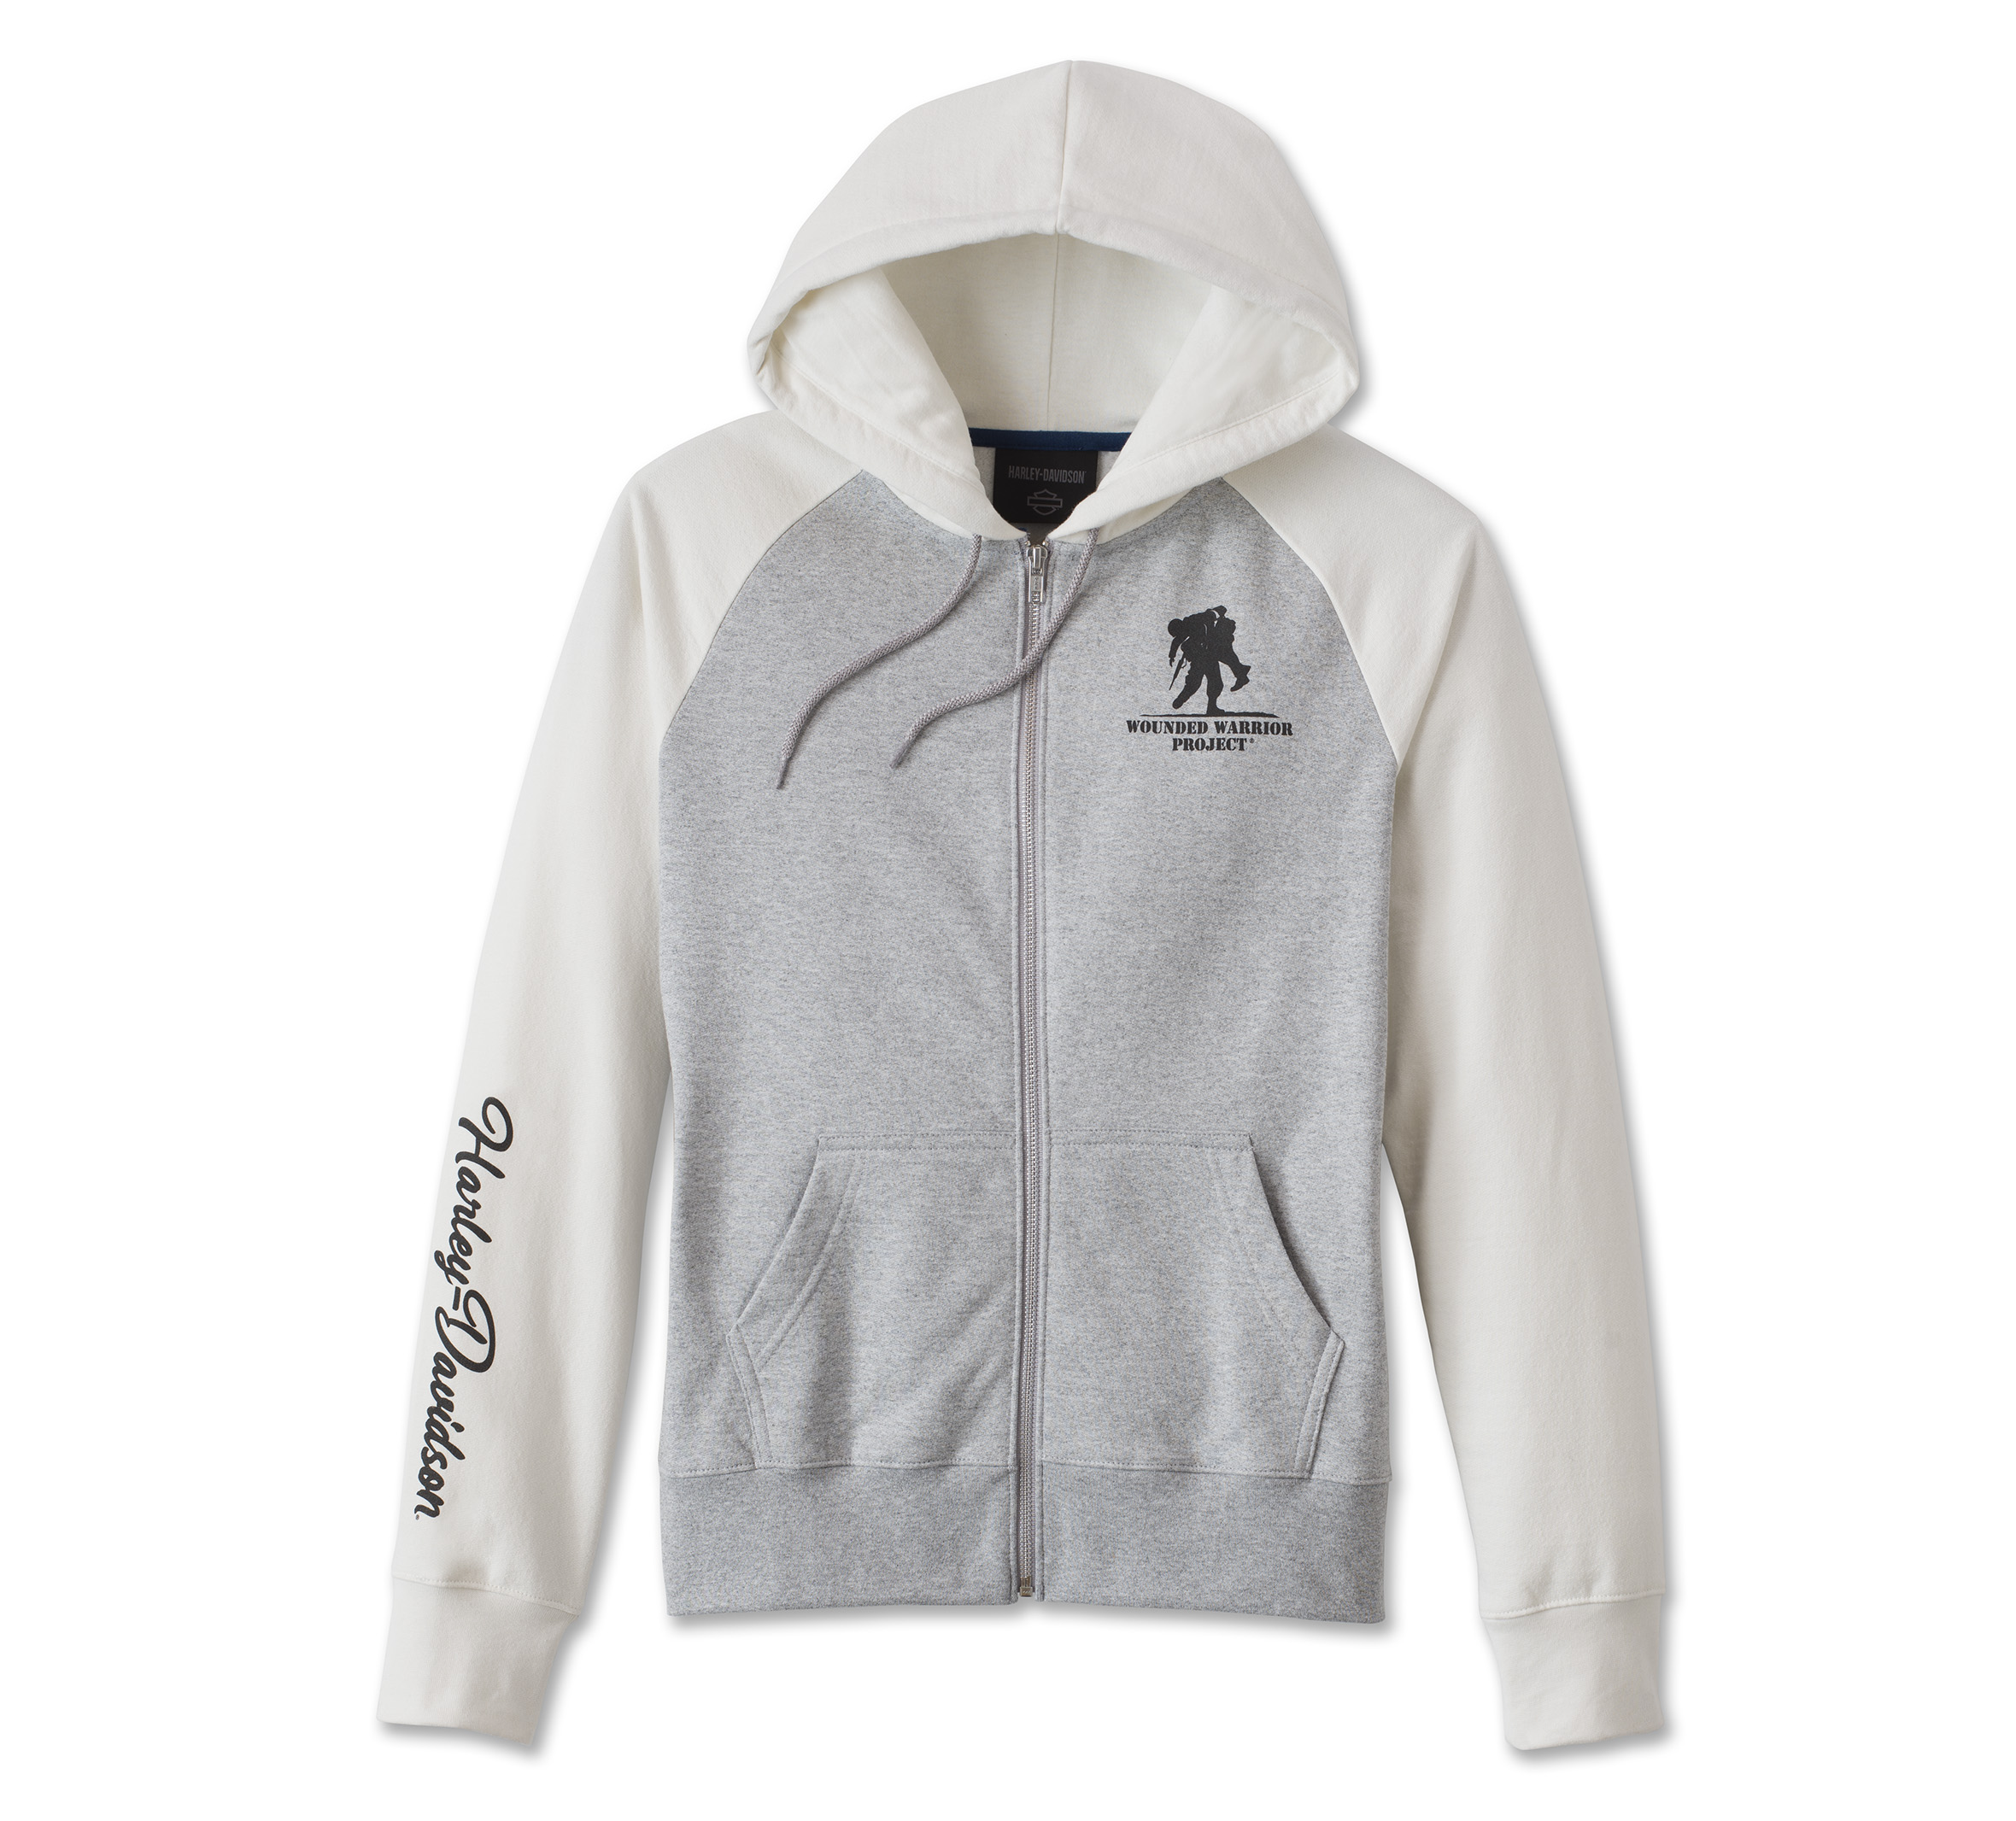 Women's Wounded Warrior Project Zip Front Hoodie - Colorblocked